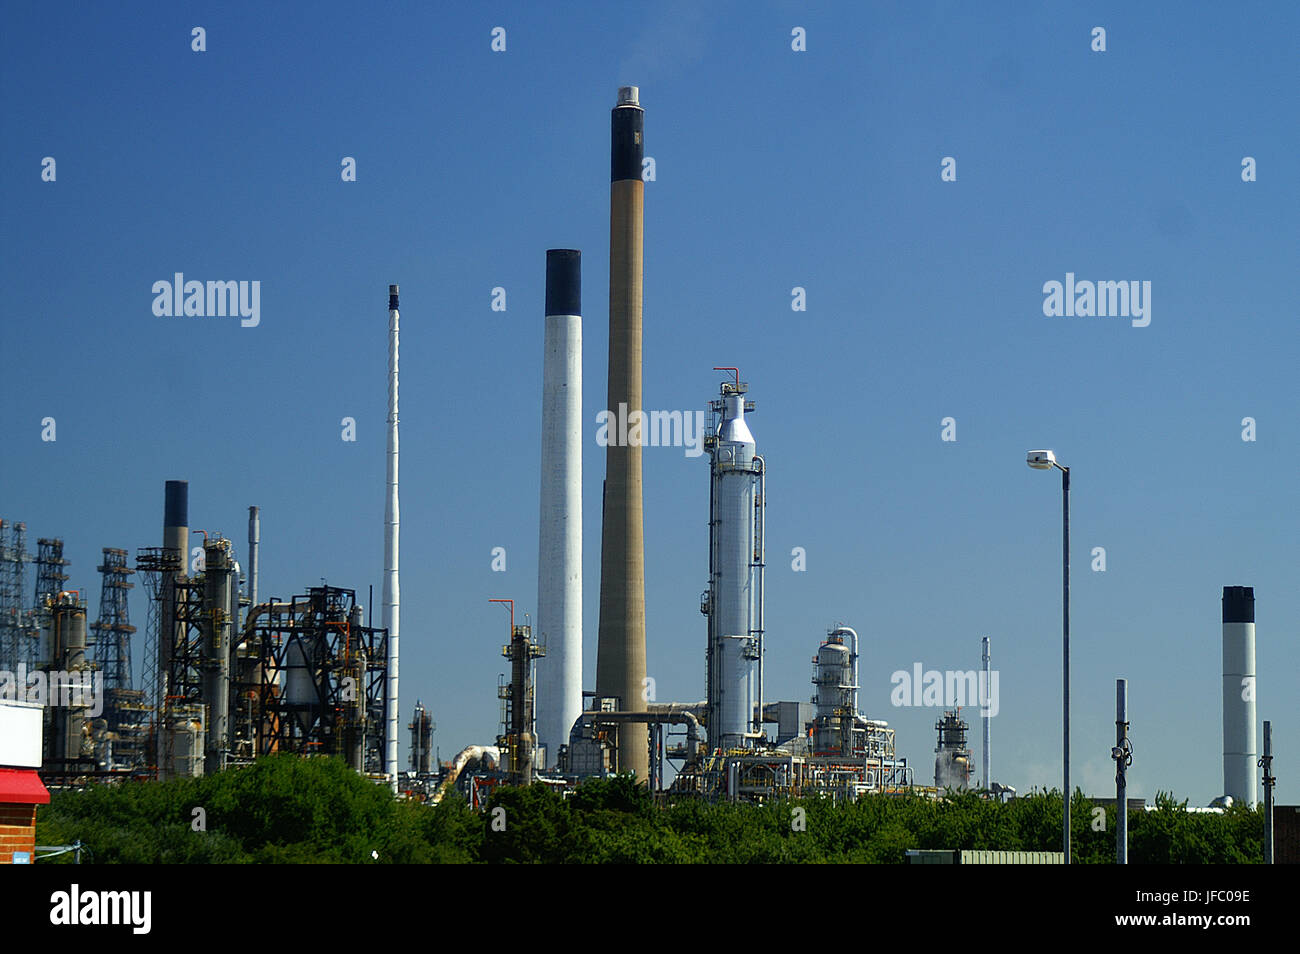 Humber Refinery, Lincolnshire, Stock Photo